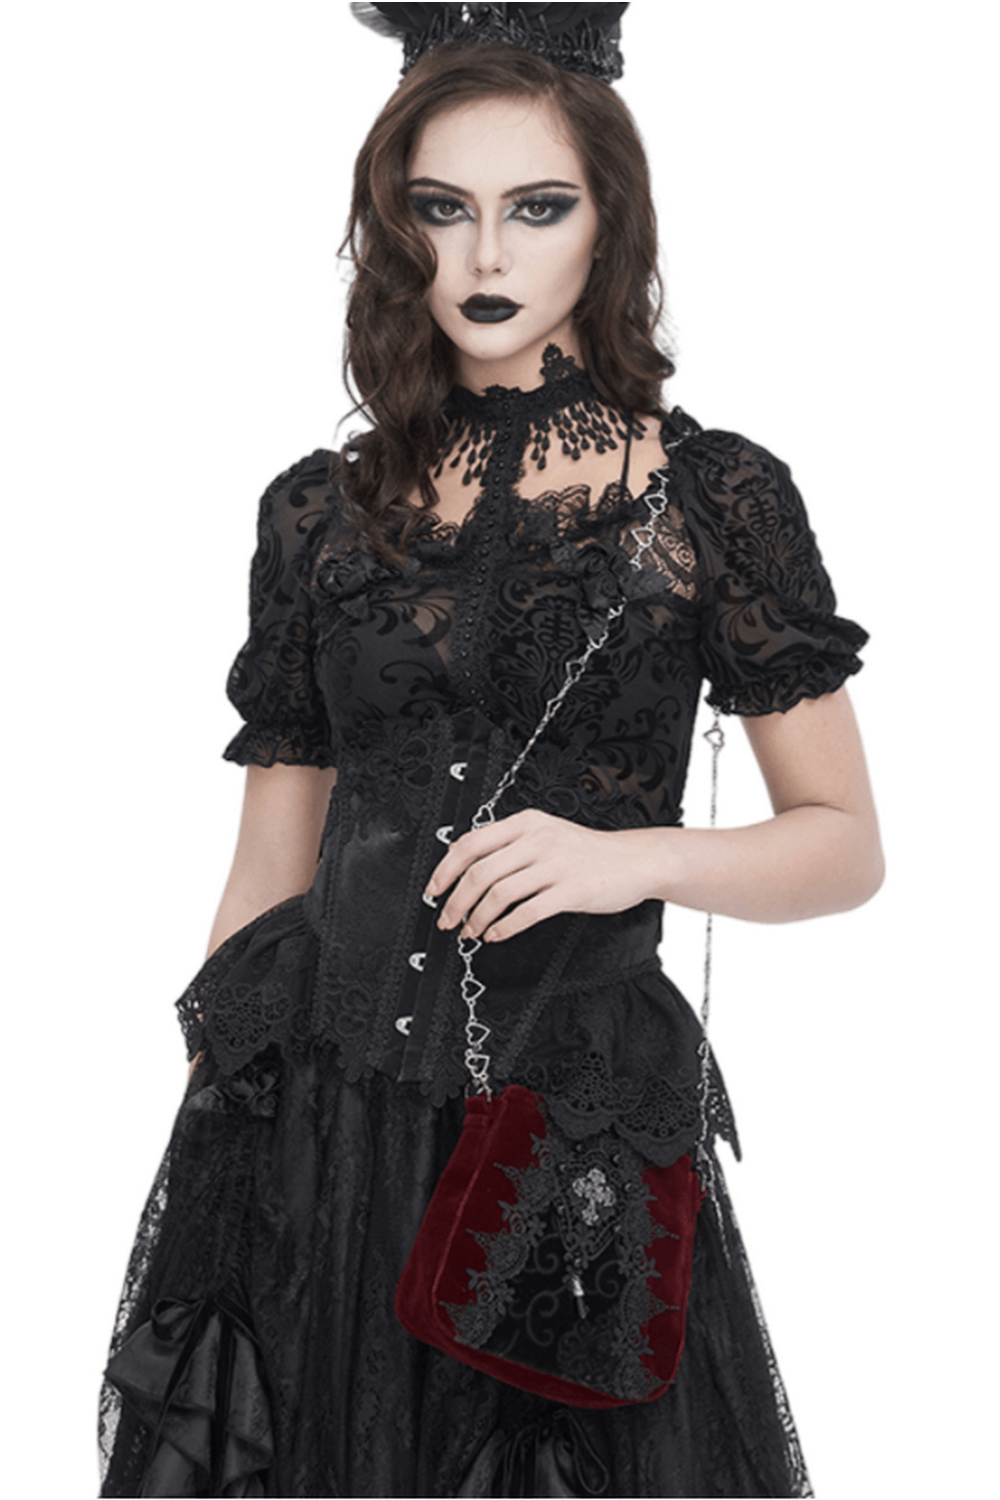 Women's Gothic Style Lace and Velvet Shoulder Bag